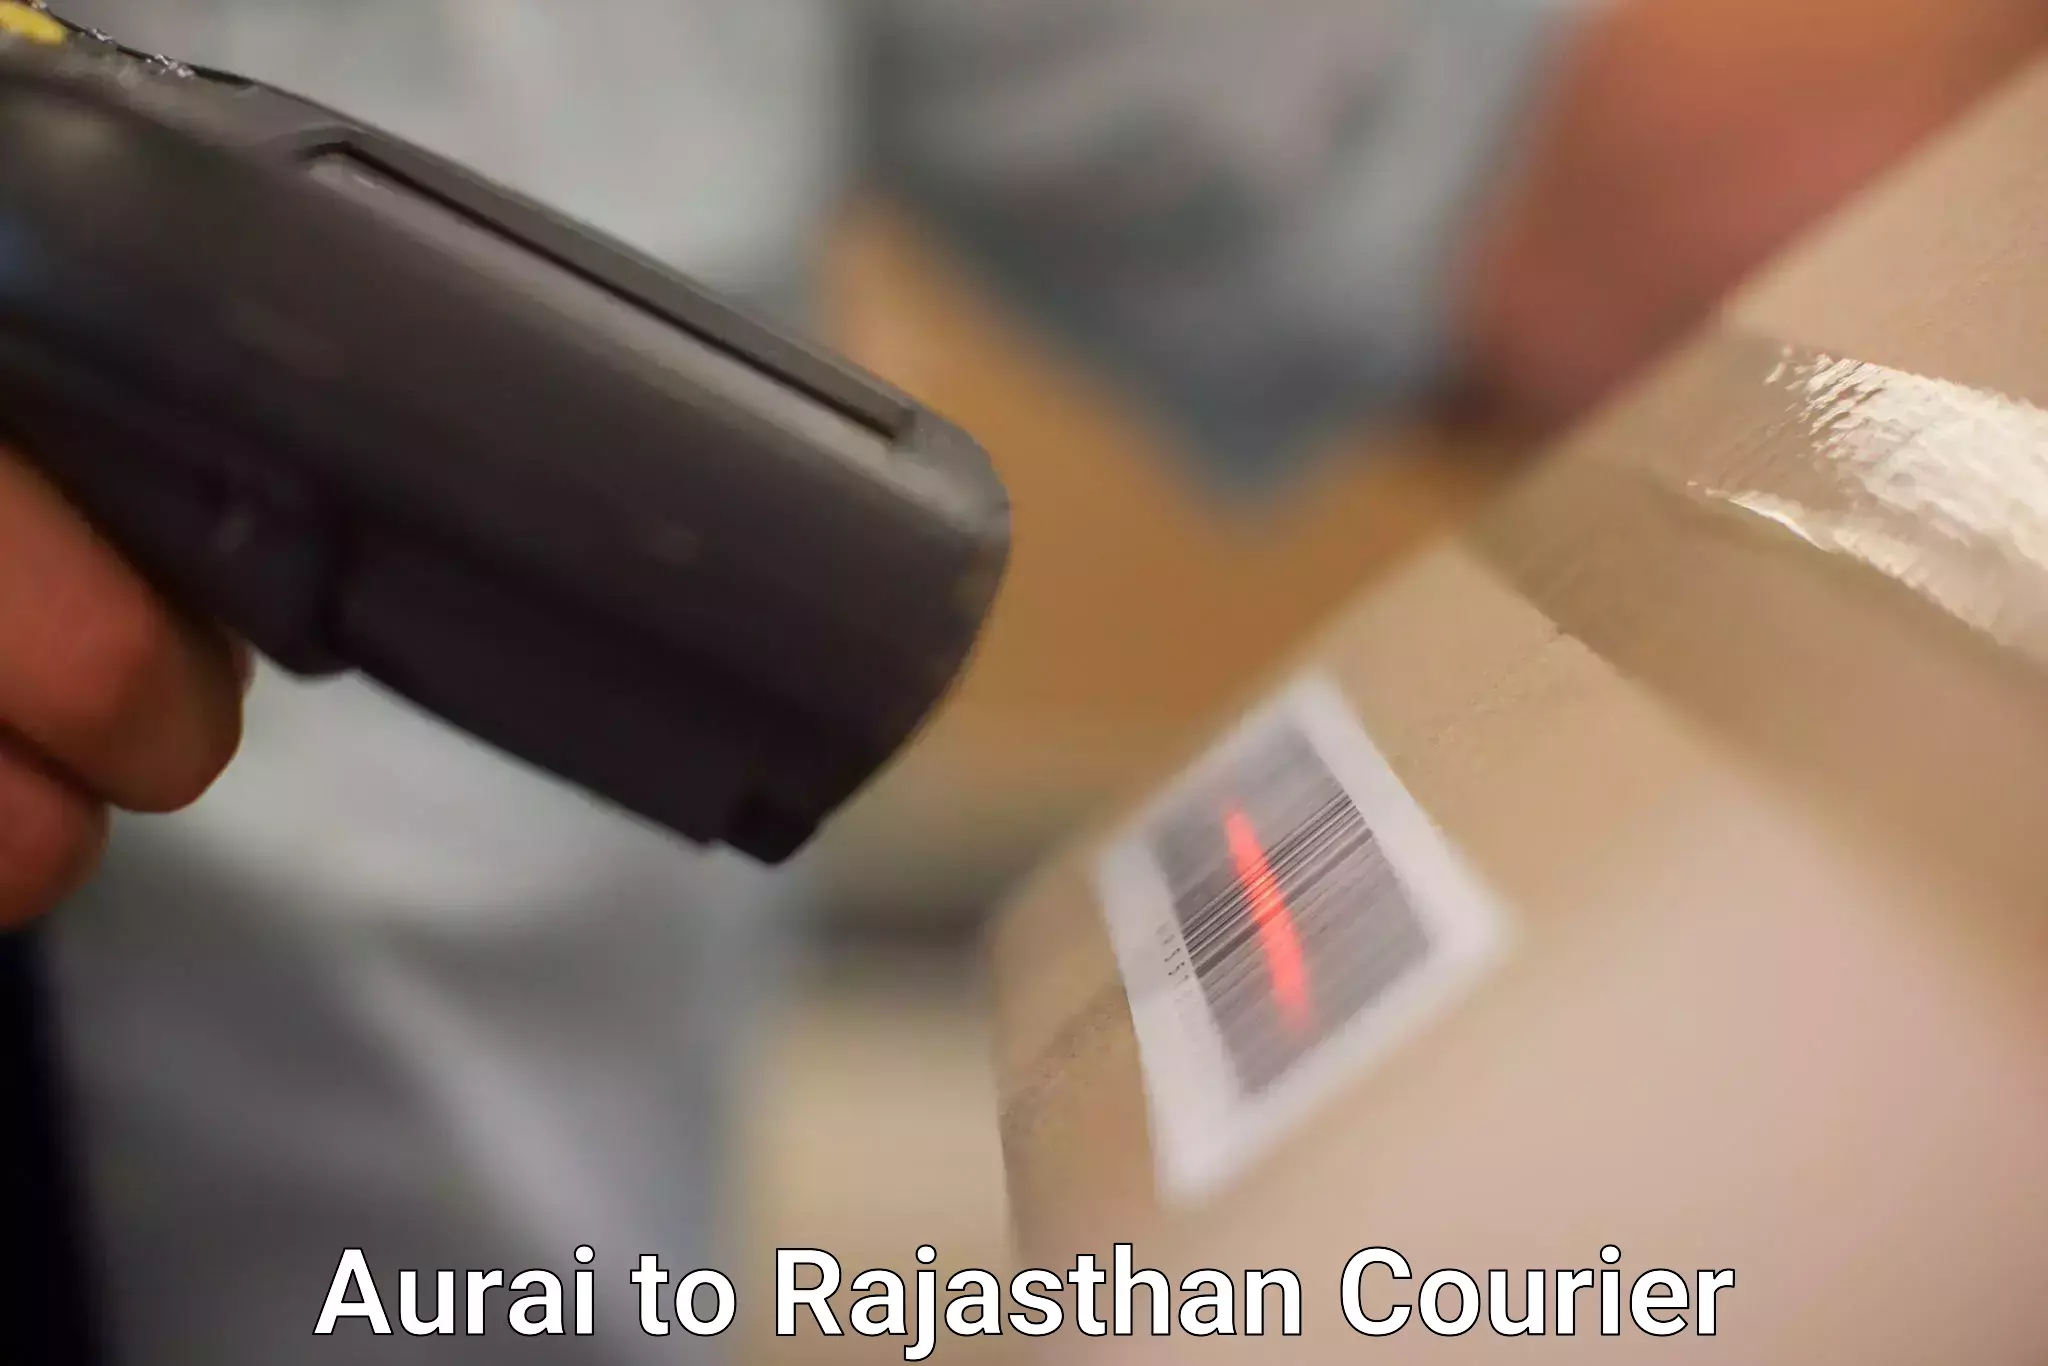 Affordable international shipping in Aurai to Dholpur